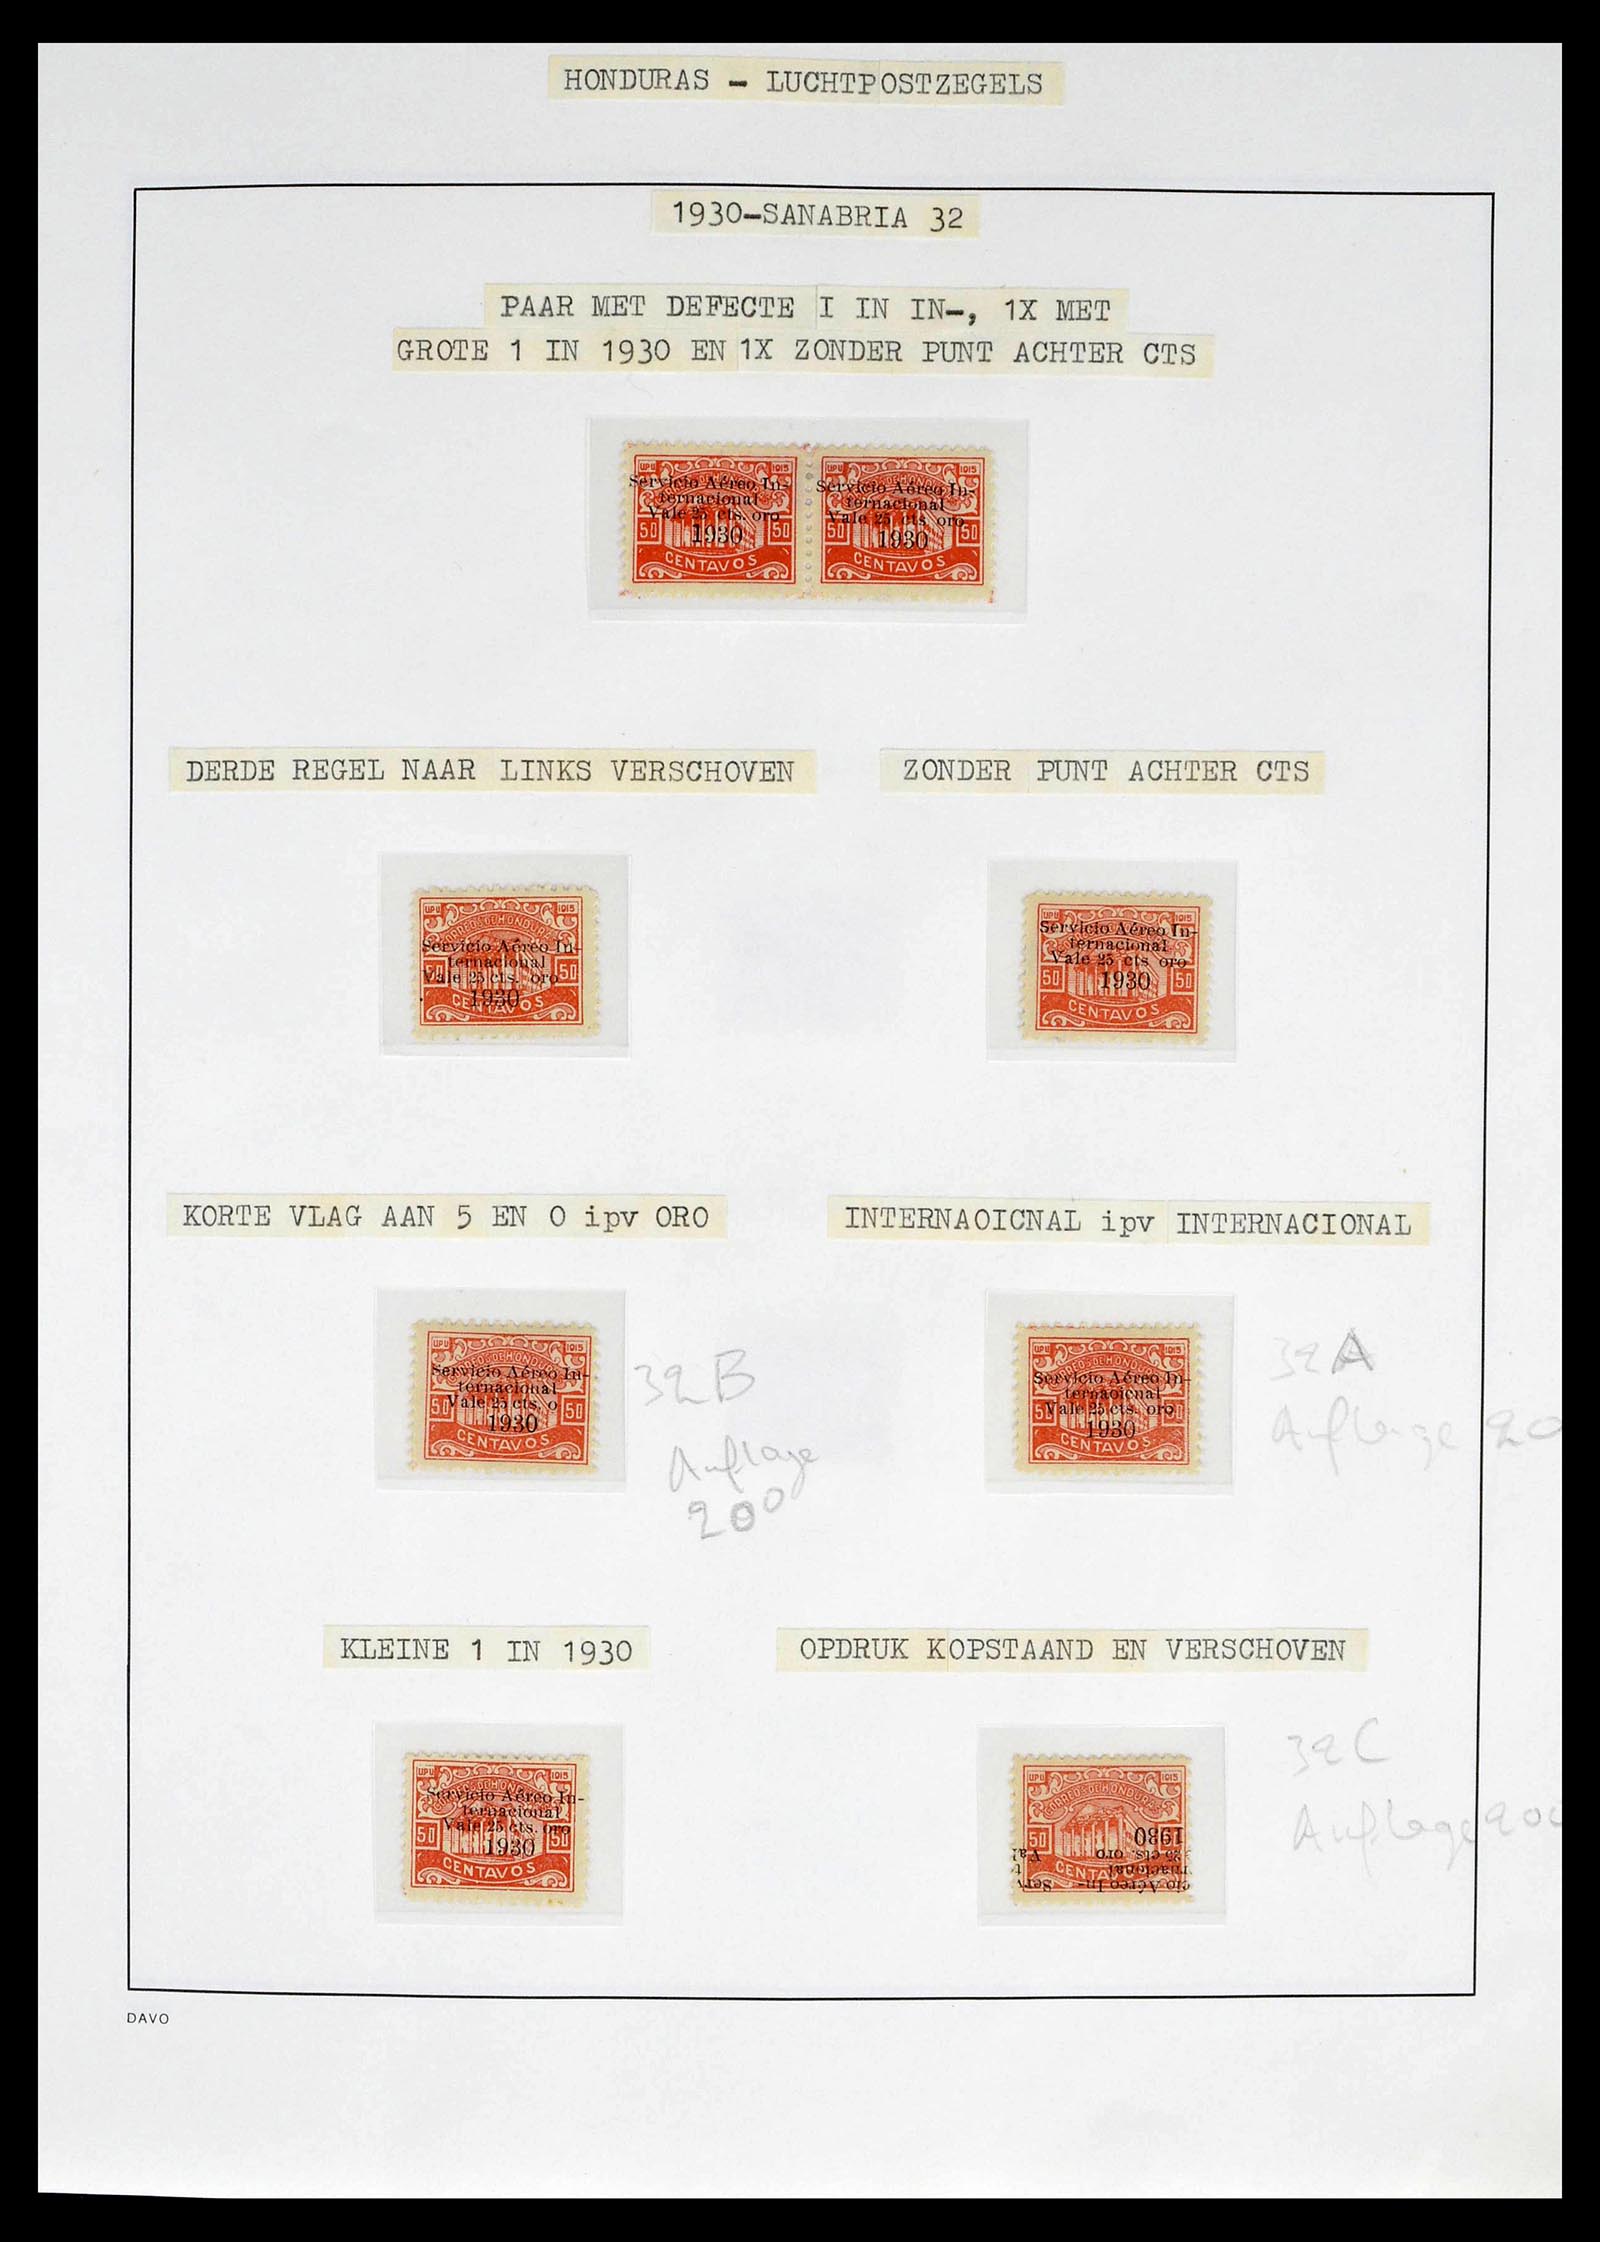 39410 0011 - Stamp collection 39410 Honduras topcollection airmail 1925-1984.